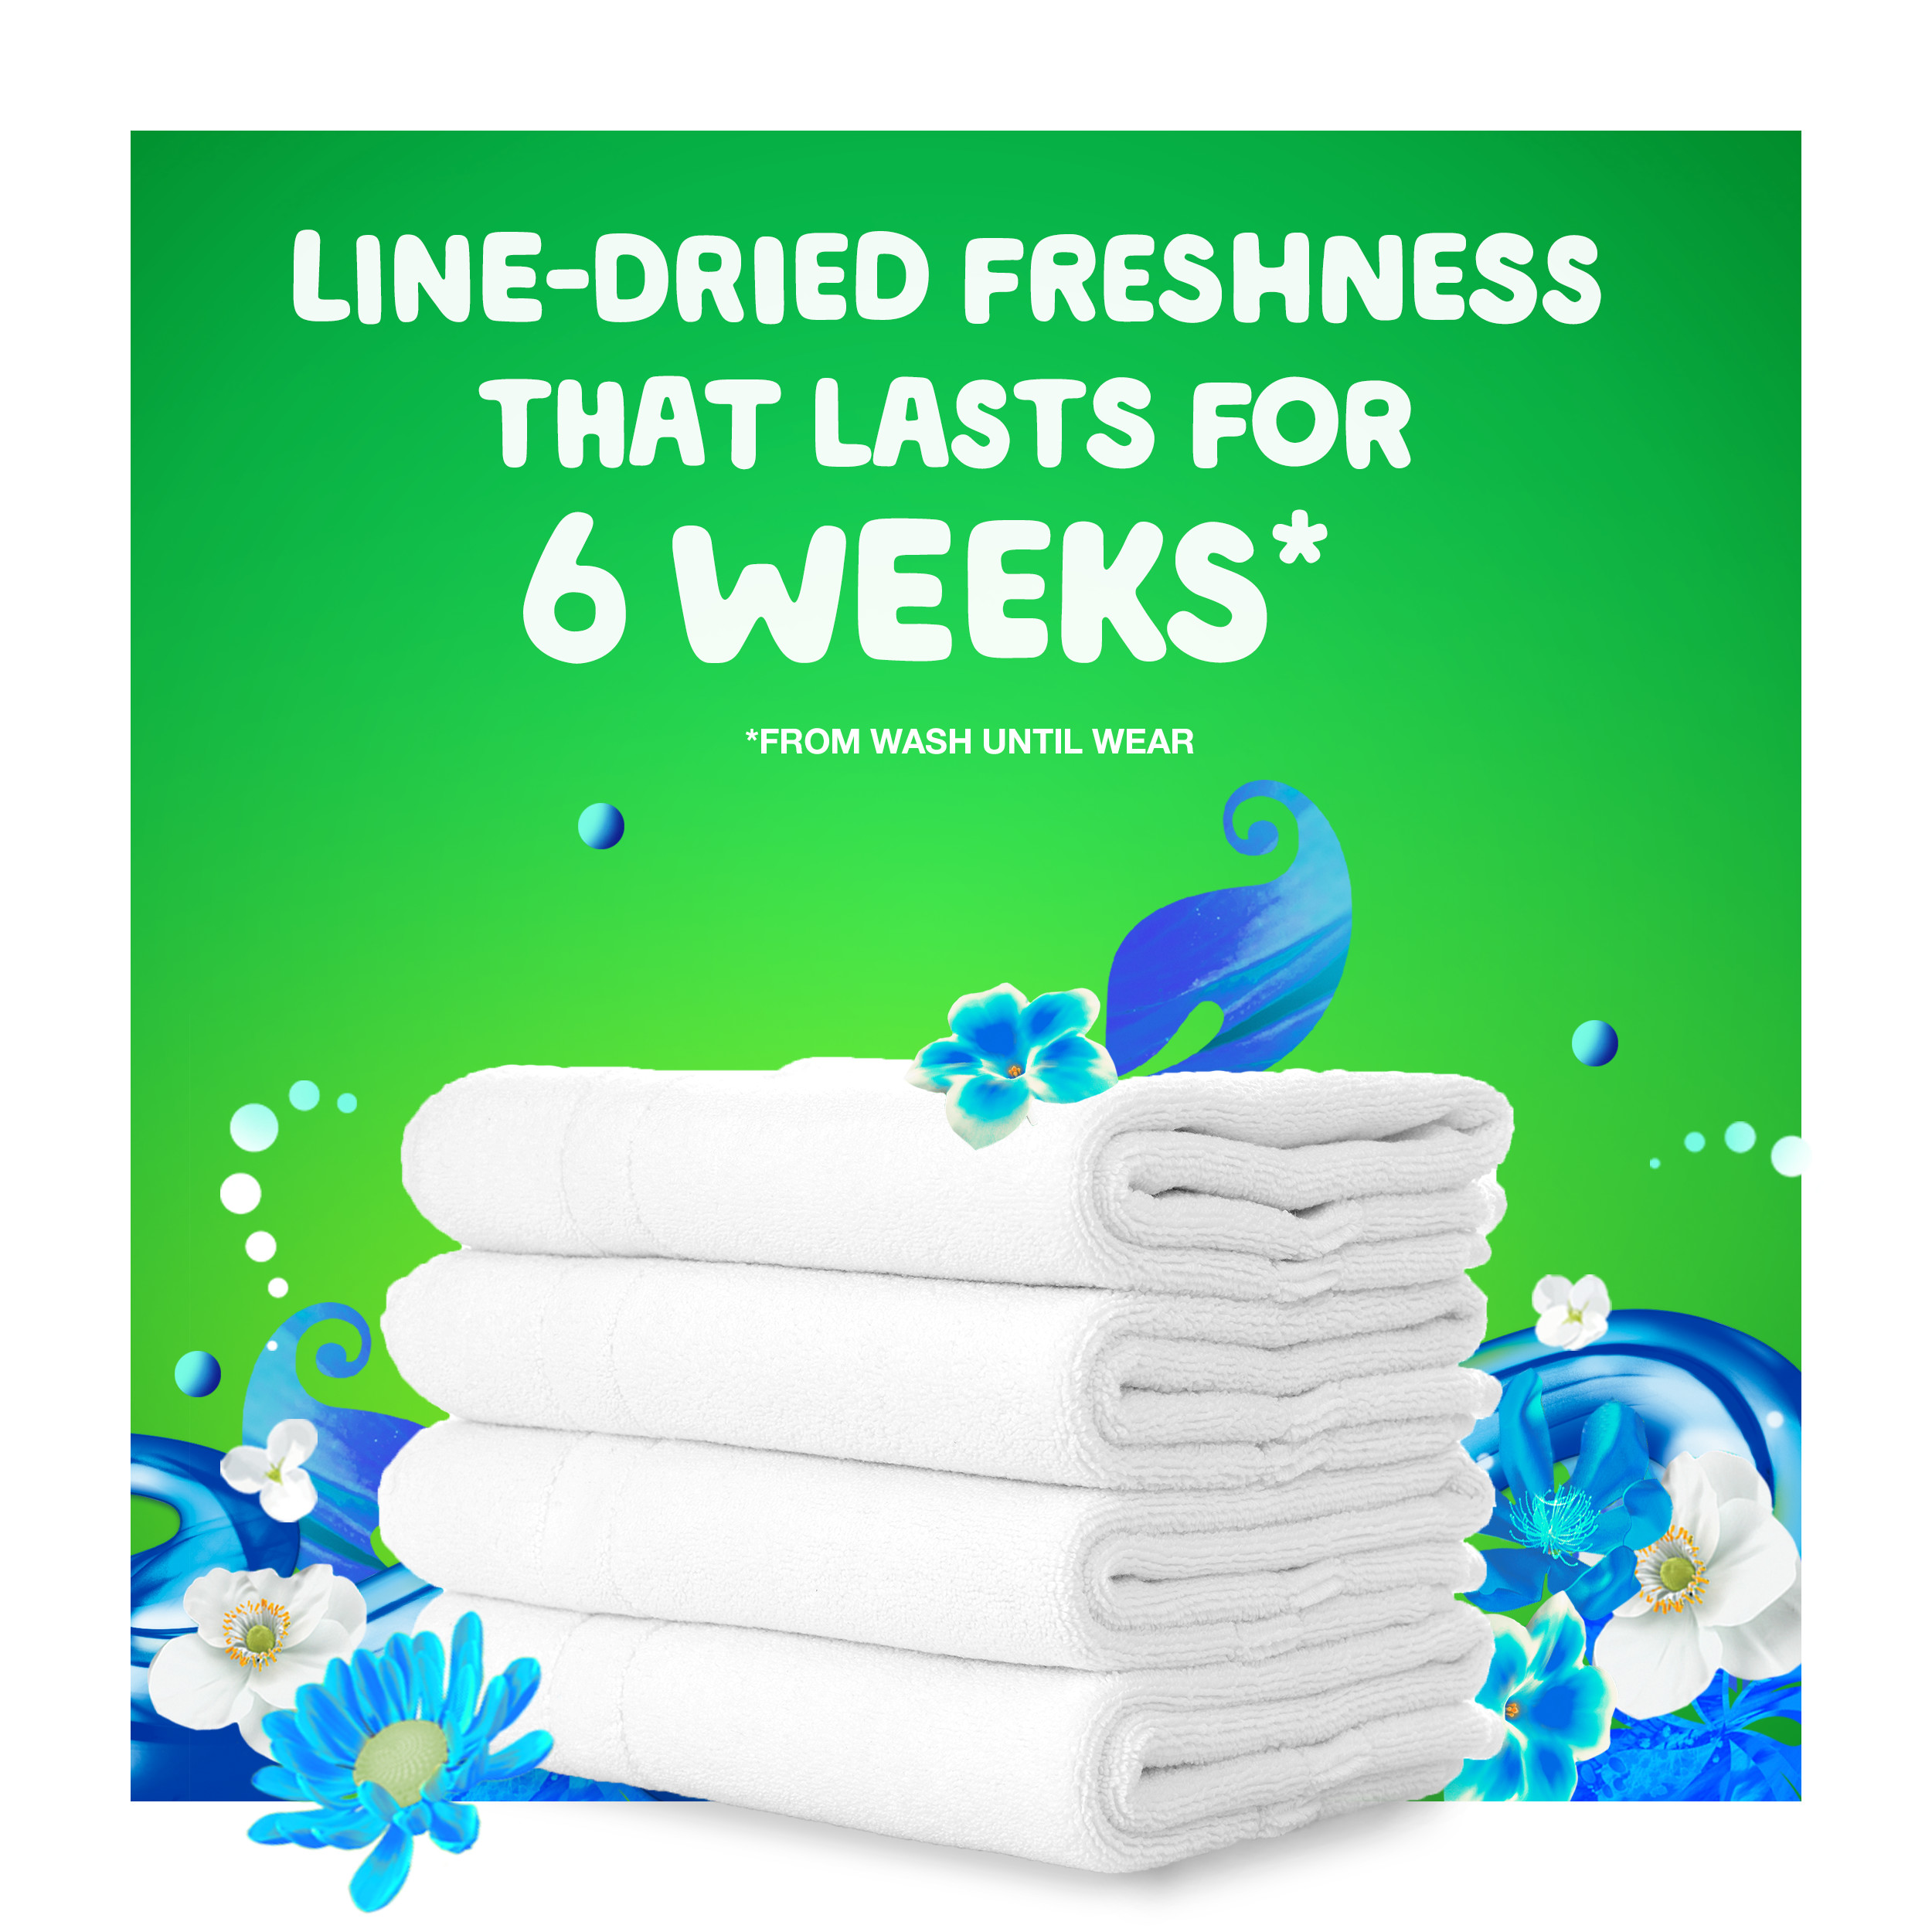 Freshly washed towels with Gain Blissful Breeze Liquid Laundry Detergent keep six weeks of summery freshness